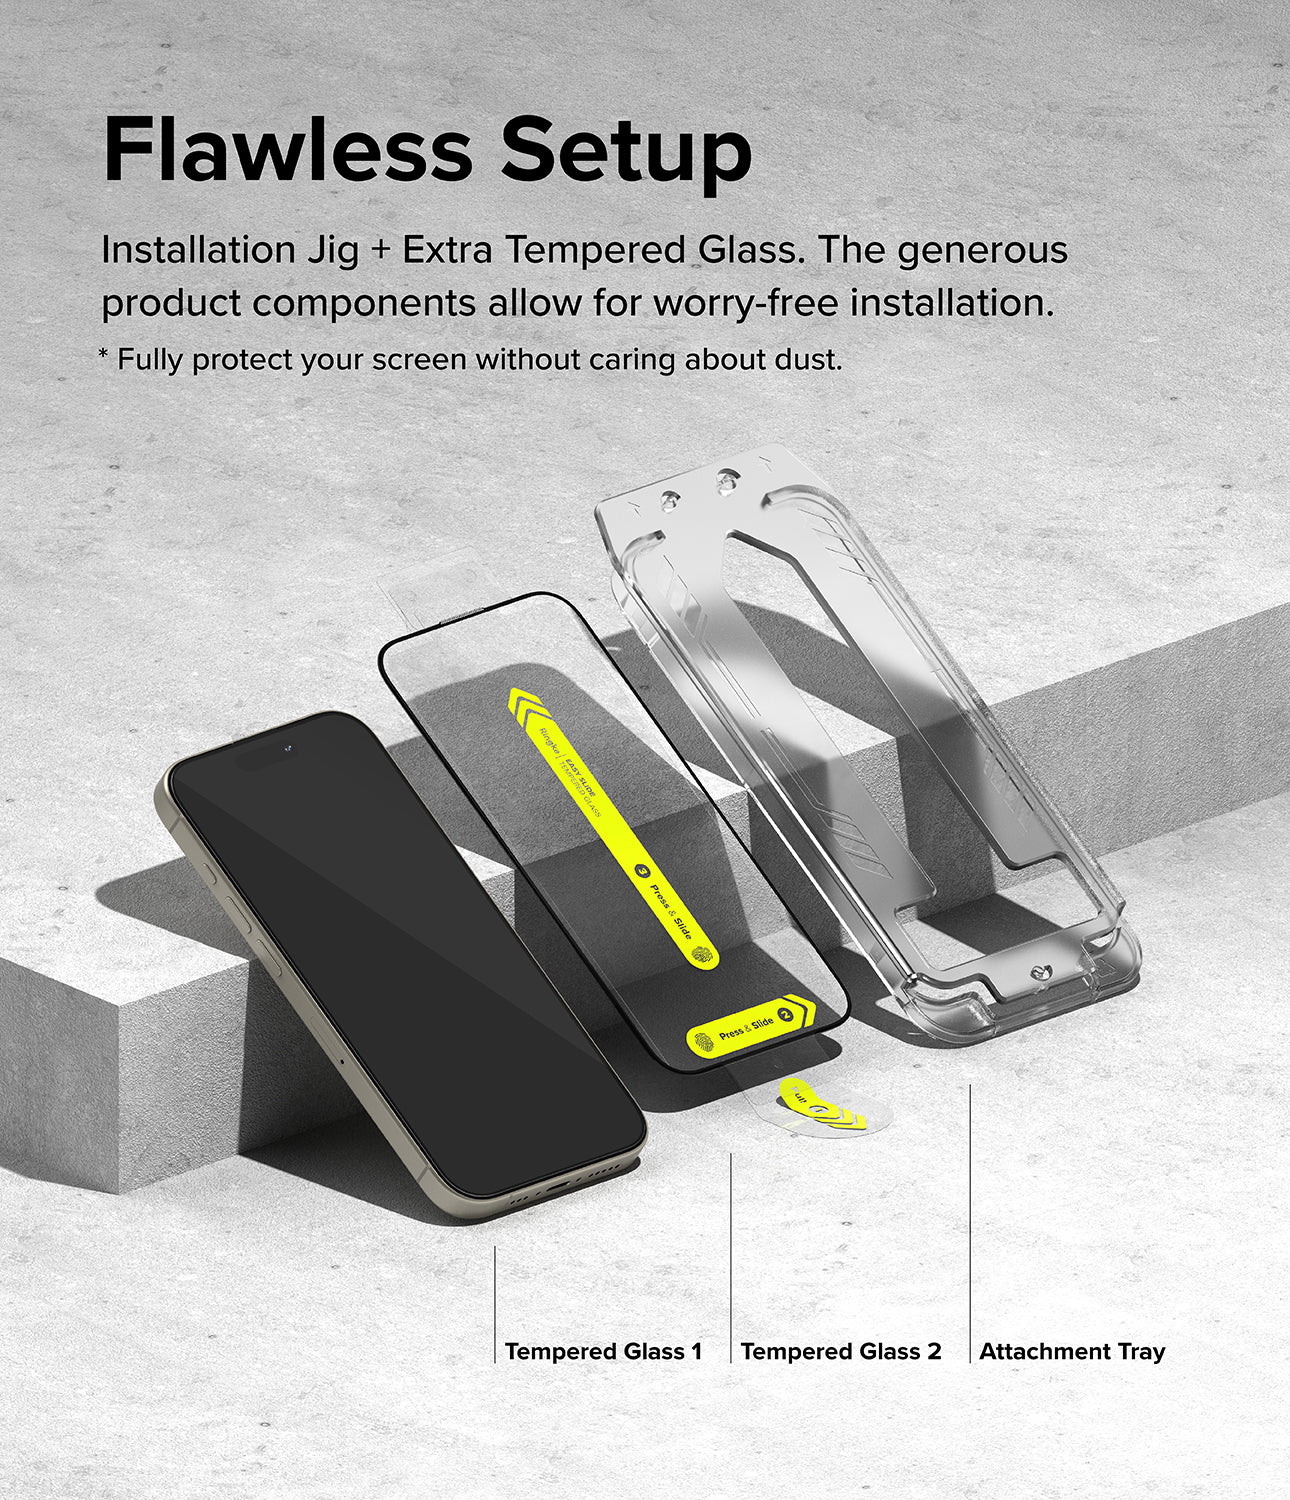 iPhone 15 Pro Max Screen Protector | Easy Slide Tempered Glass - Flawless Setup. Installation Jig + Extra Tempered Glass. The generious product components allow for worry-free installation.